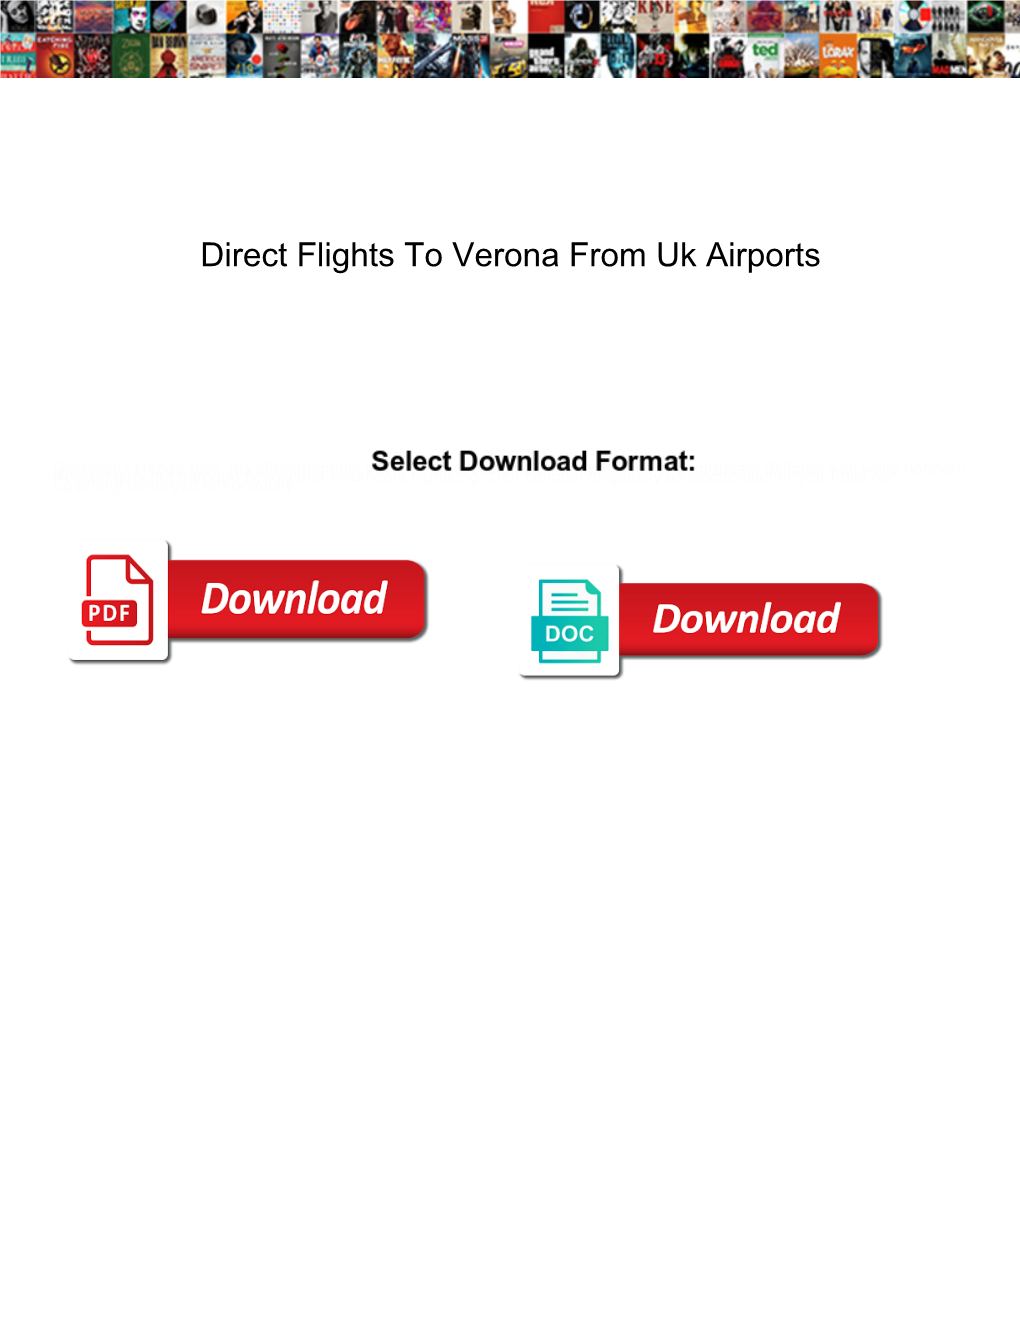 Direct Flights to Verona from Uk Airports